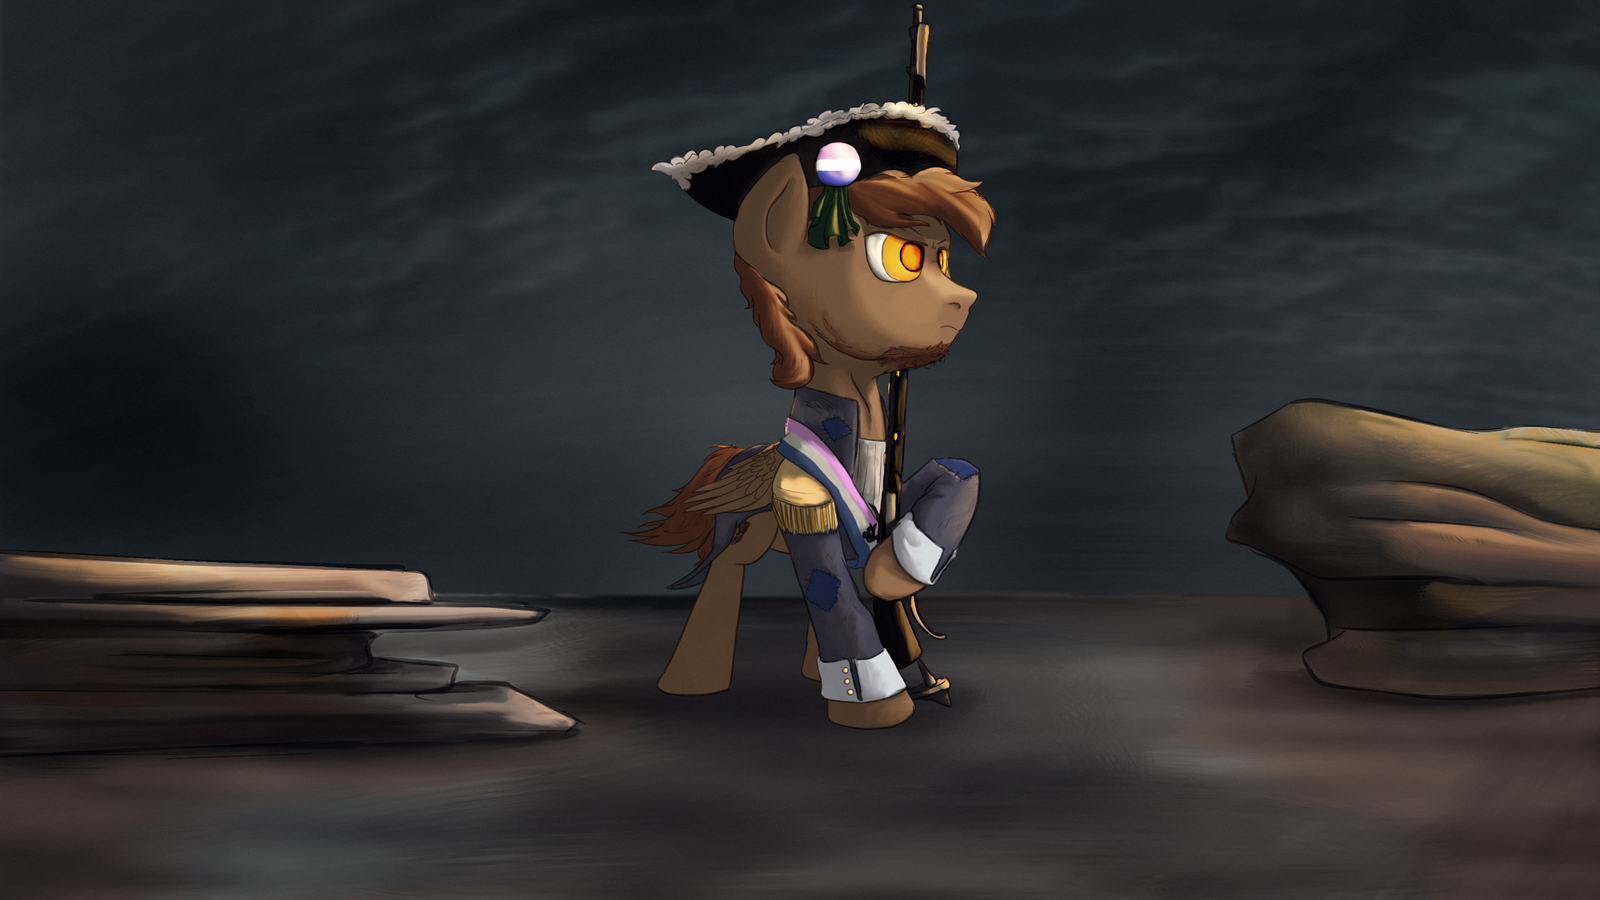 calamity_garde_by_aaronmk-db8cp9b.png